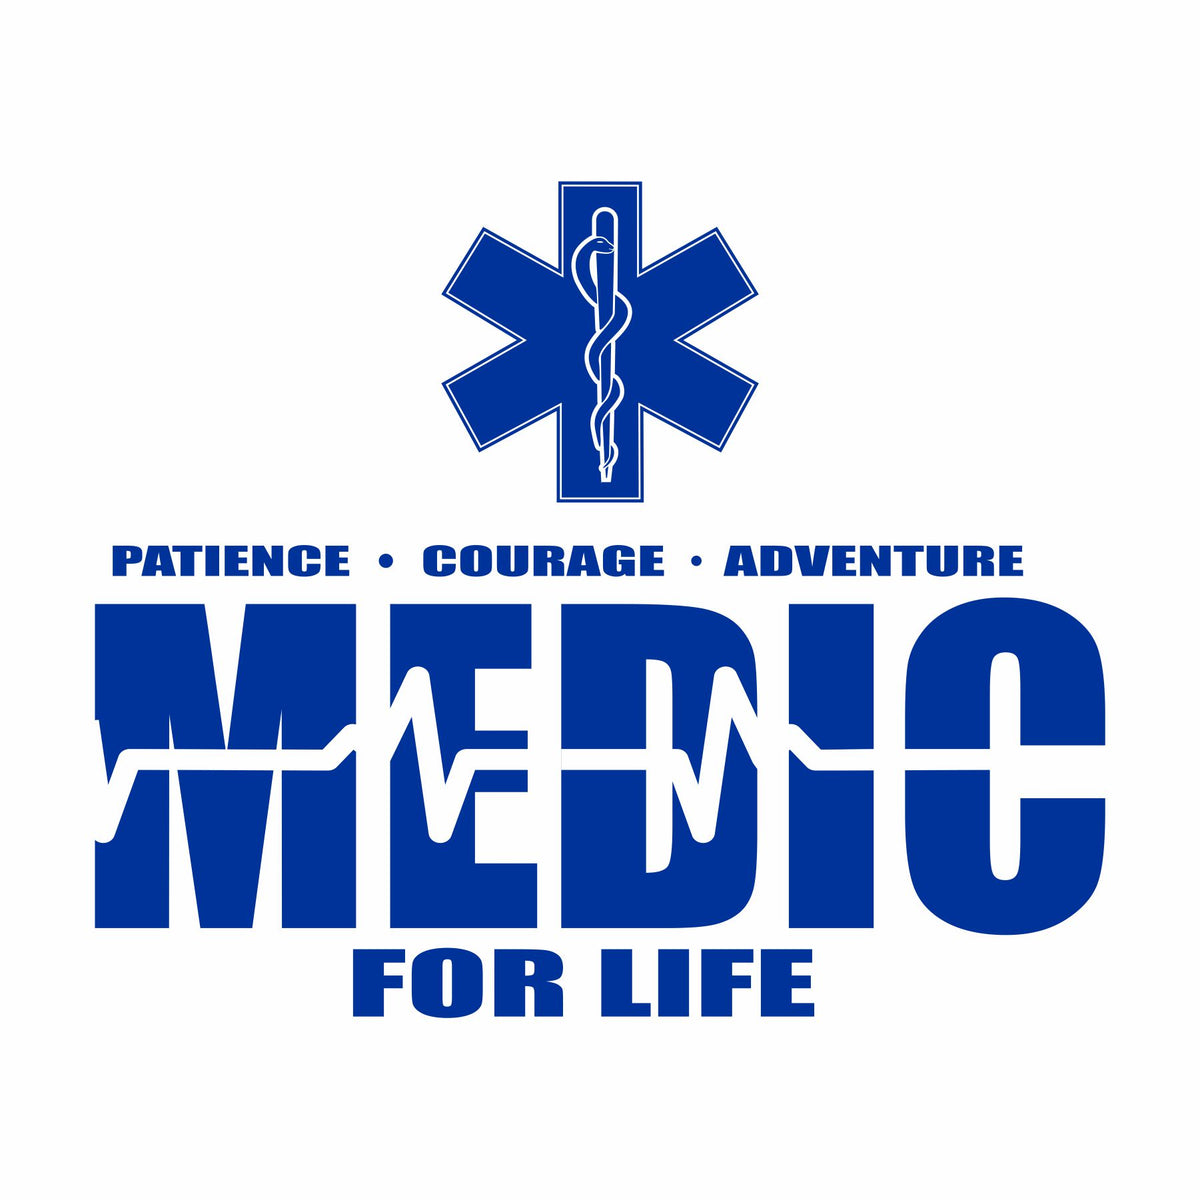 Medic for Life - EMS - Vinyl Decal - Free Shipping